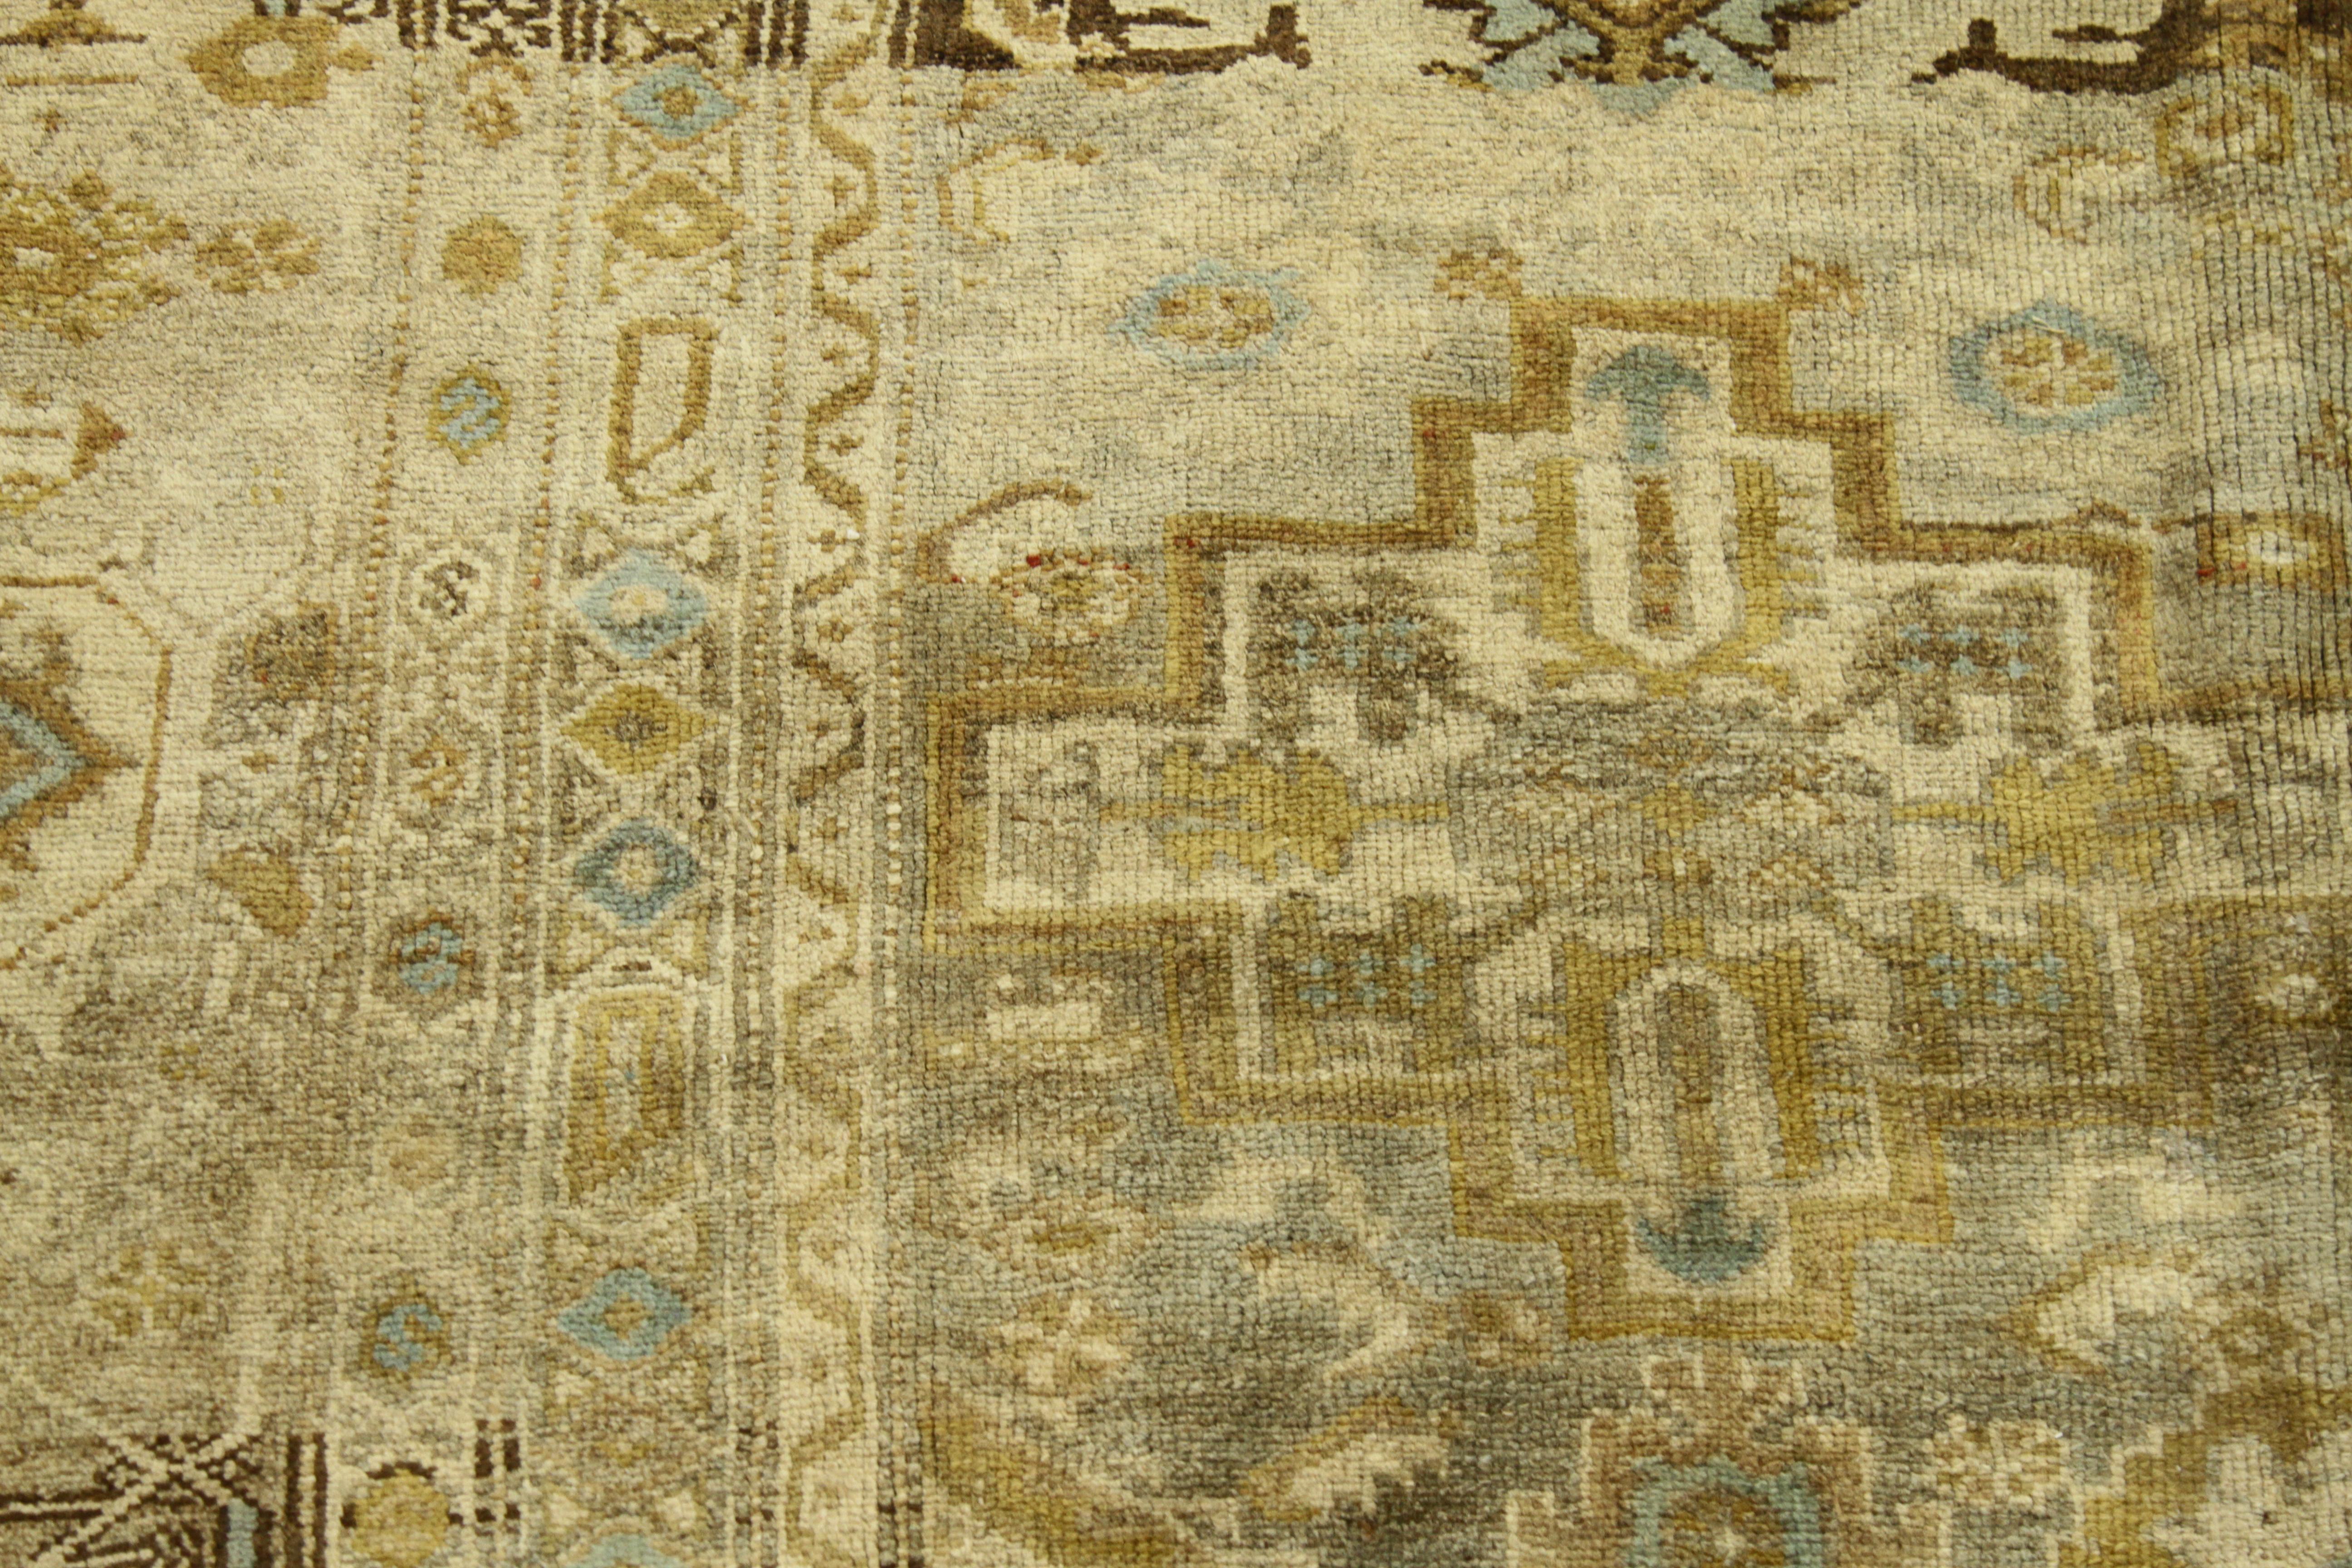 Persian Rug Malayer Design with Fading Rustic Floral Patterns, circa 1940 For Sale 3